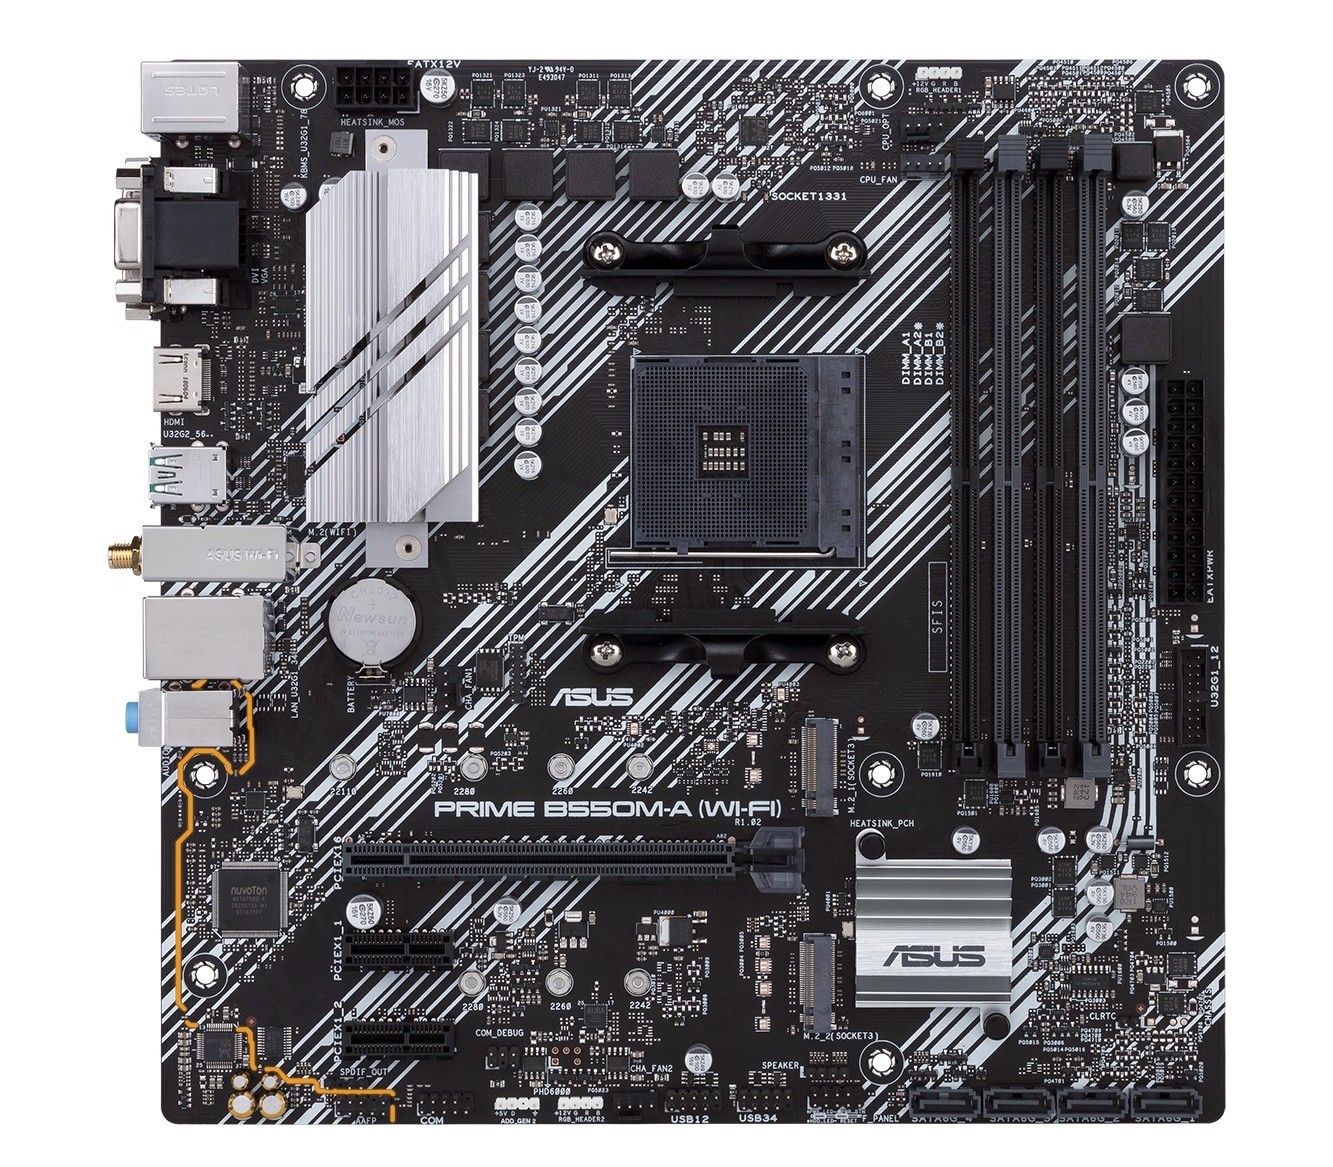 ASUS Prime B550M-A + Wi-Fi - The AMD B550 Motherboard Overview: ASUS